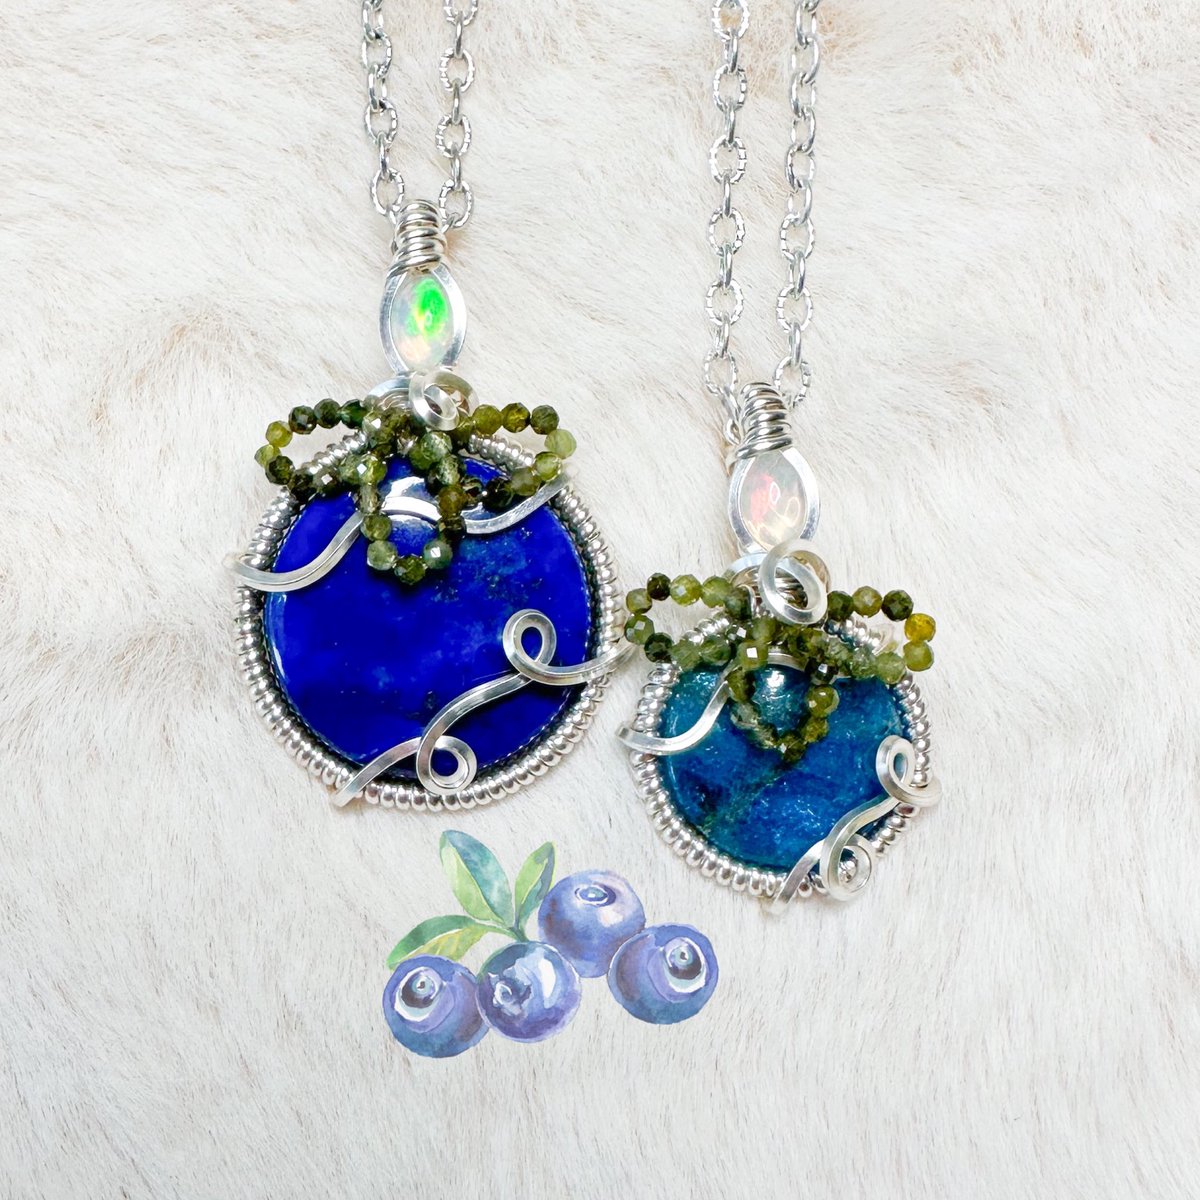 Cassie was only 25 years old when she made crystal blueberry necklaces